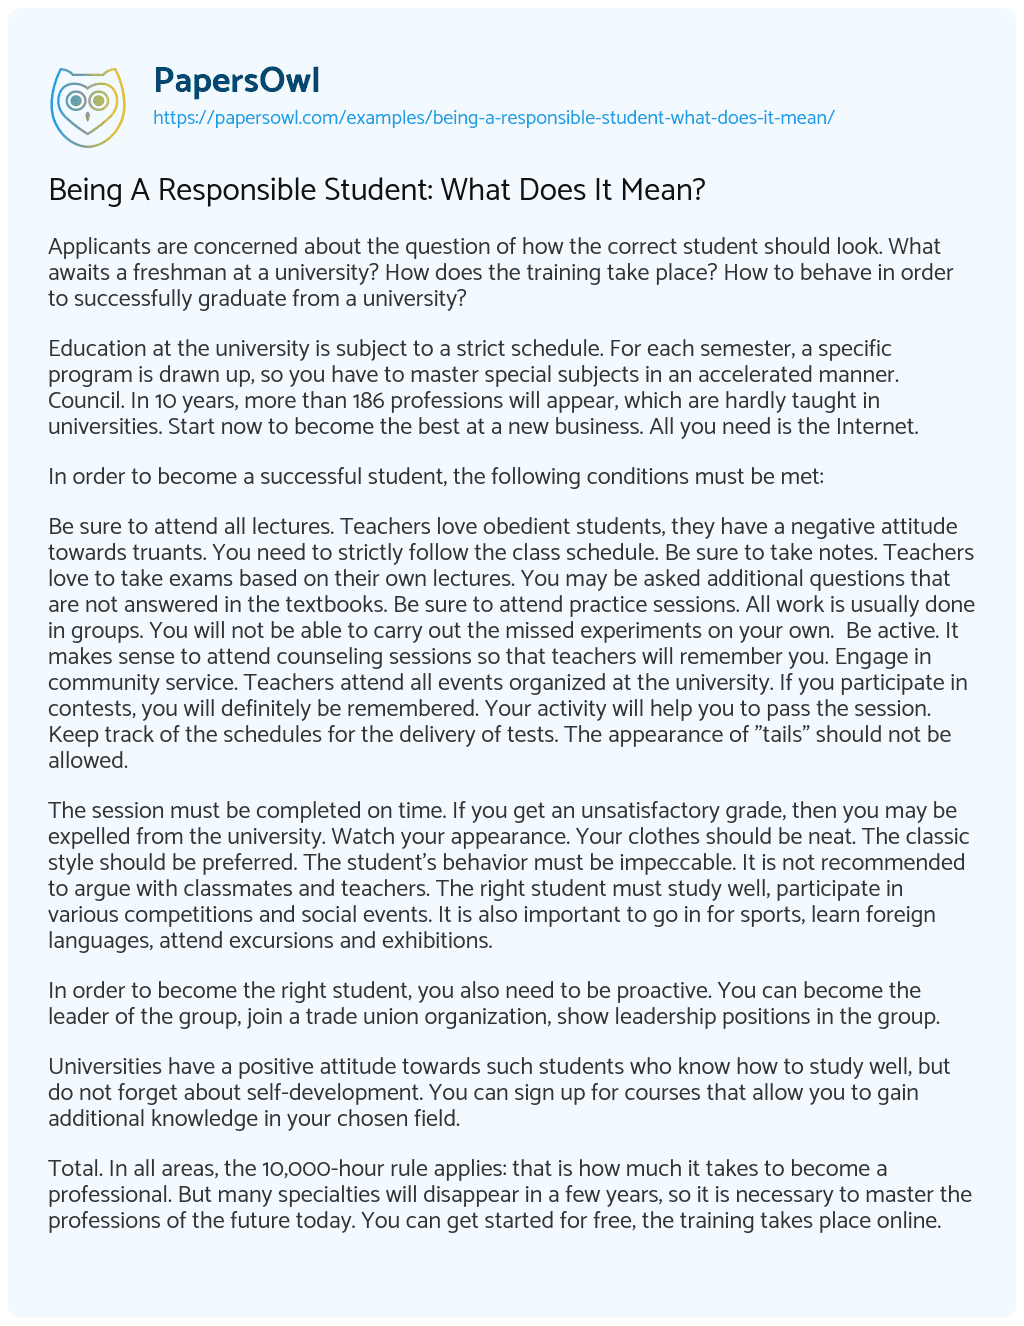 Essay on Being a Responsible Student: what does it Mean?